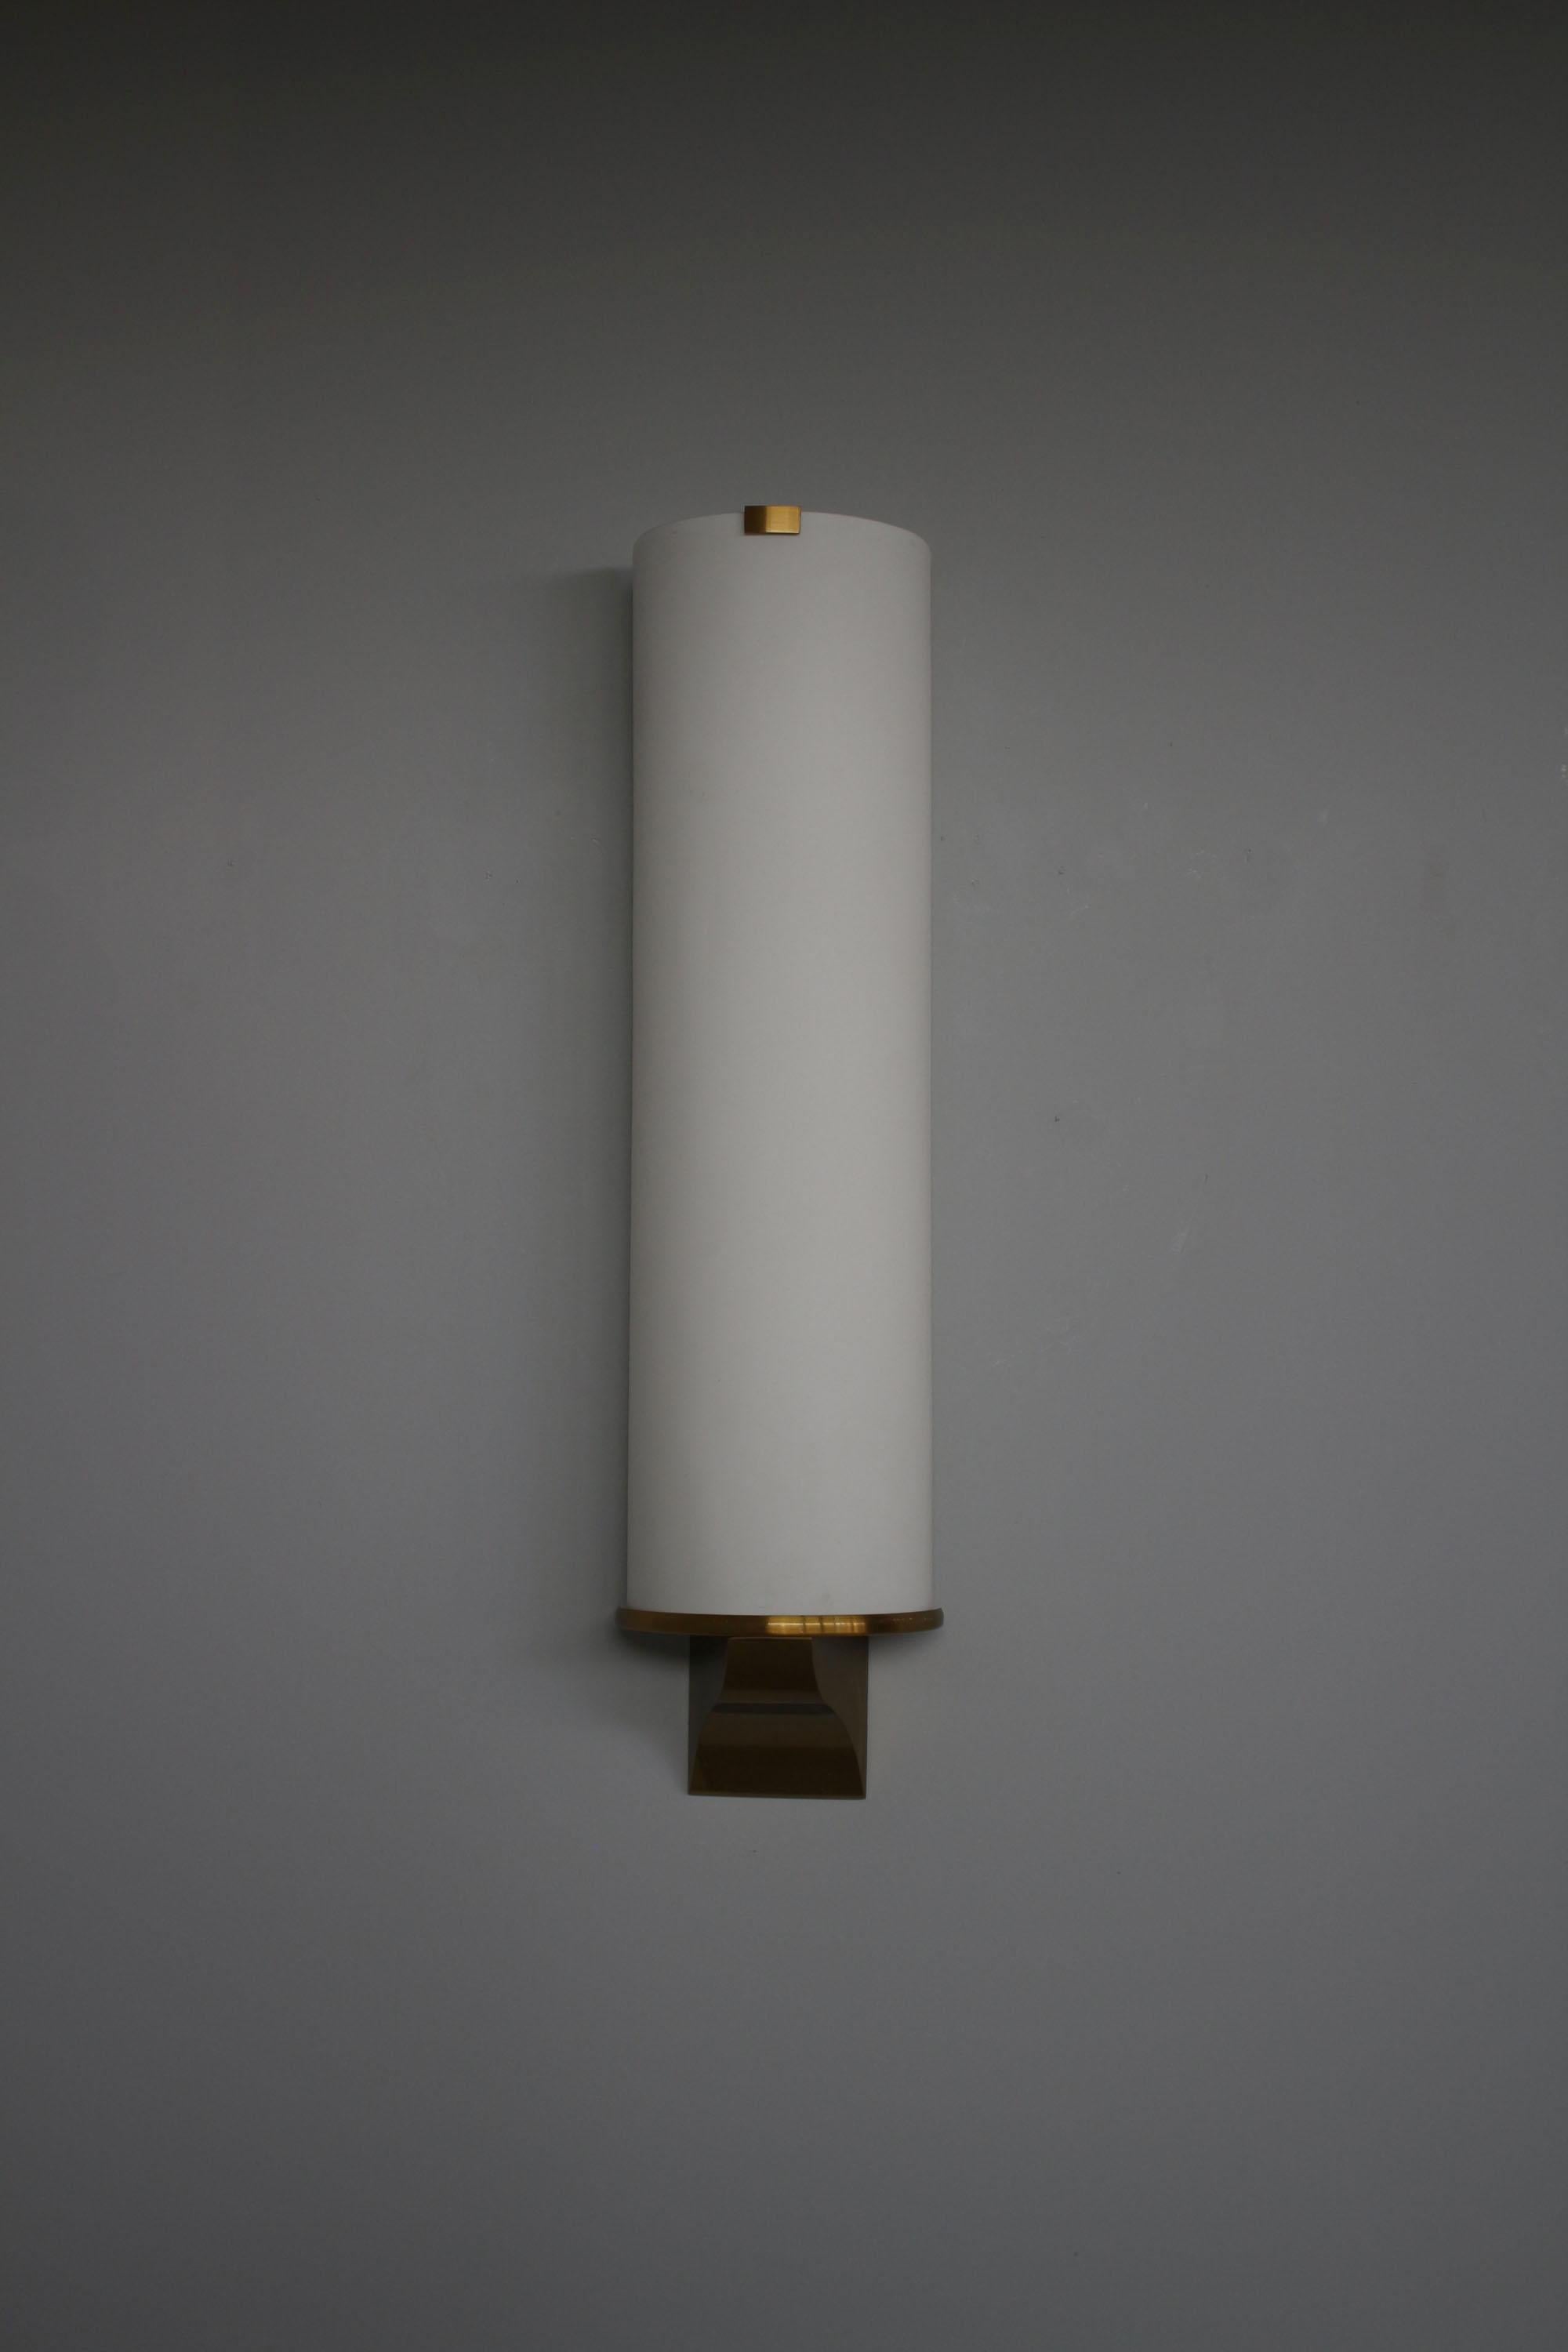 Atelier Perzel - A fine French Art Deco semi cylinder shape optical glass wall light supported by a bronze mount.